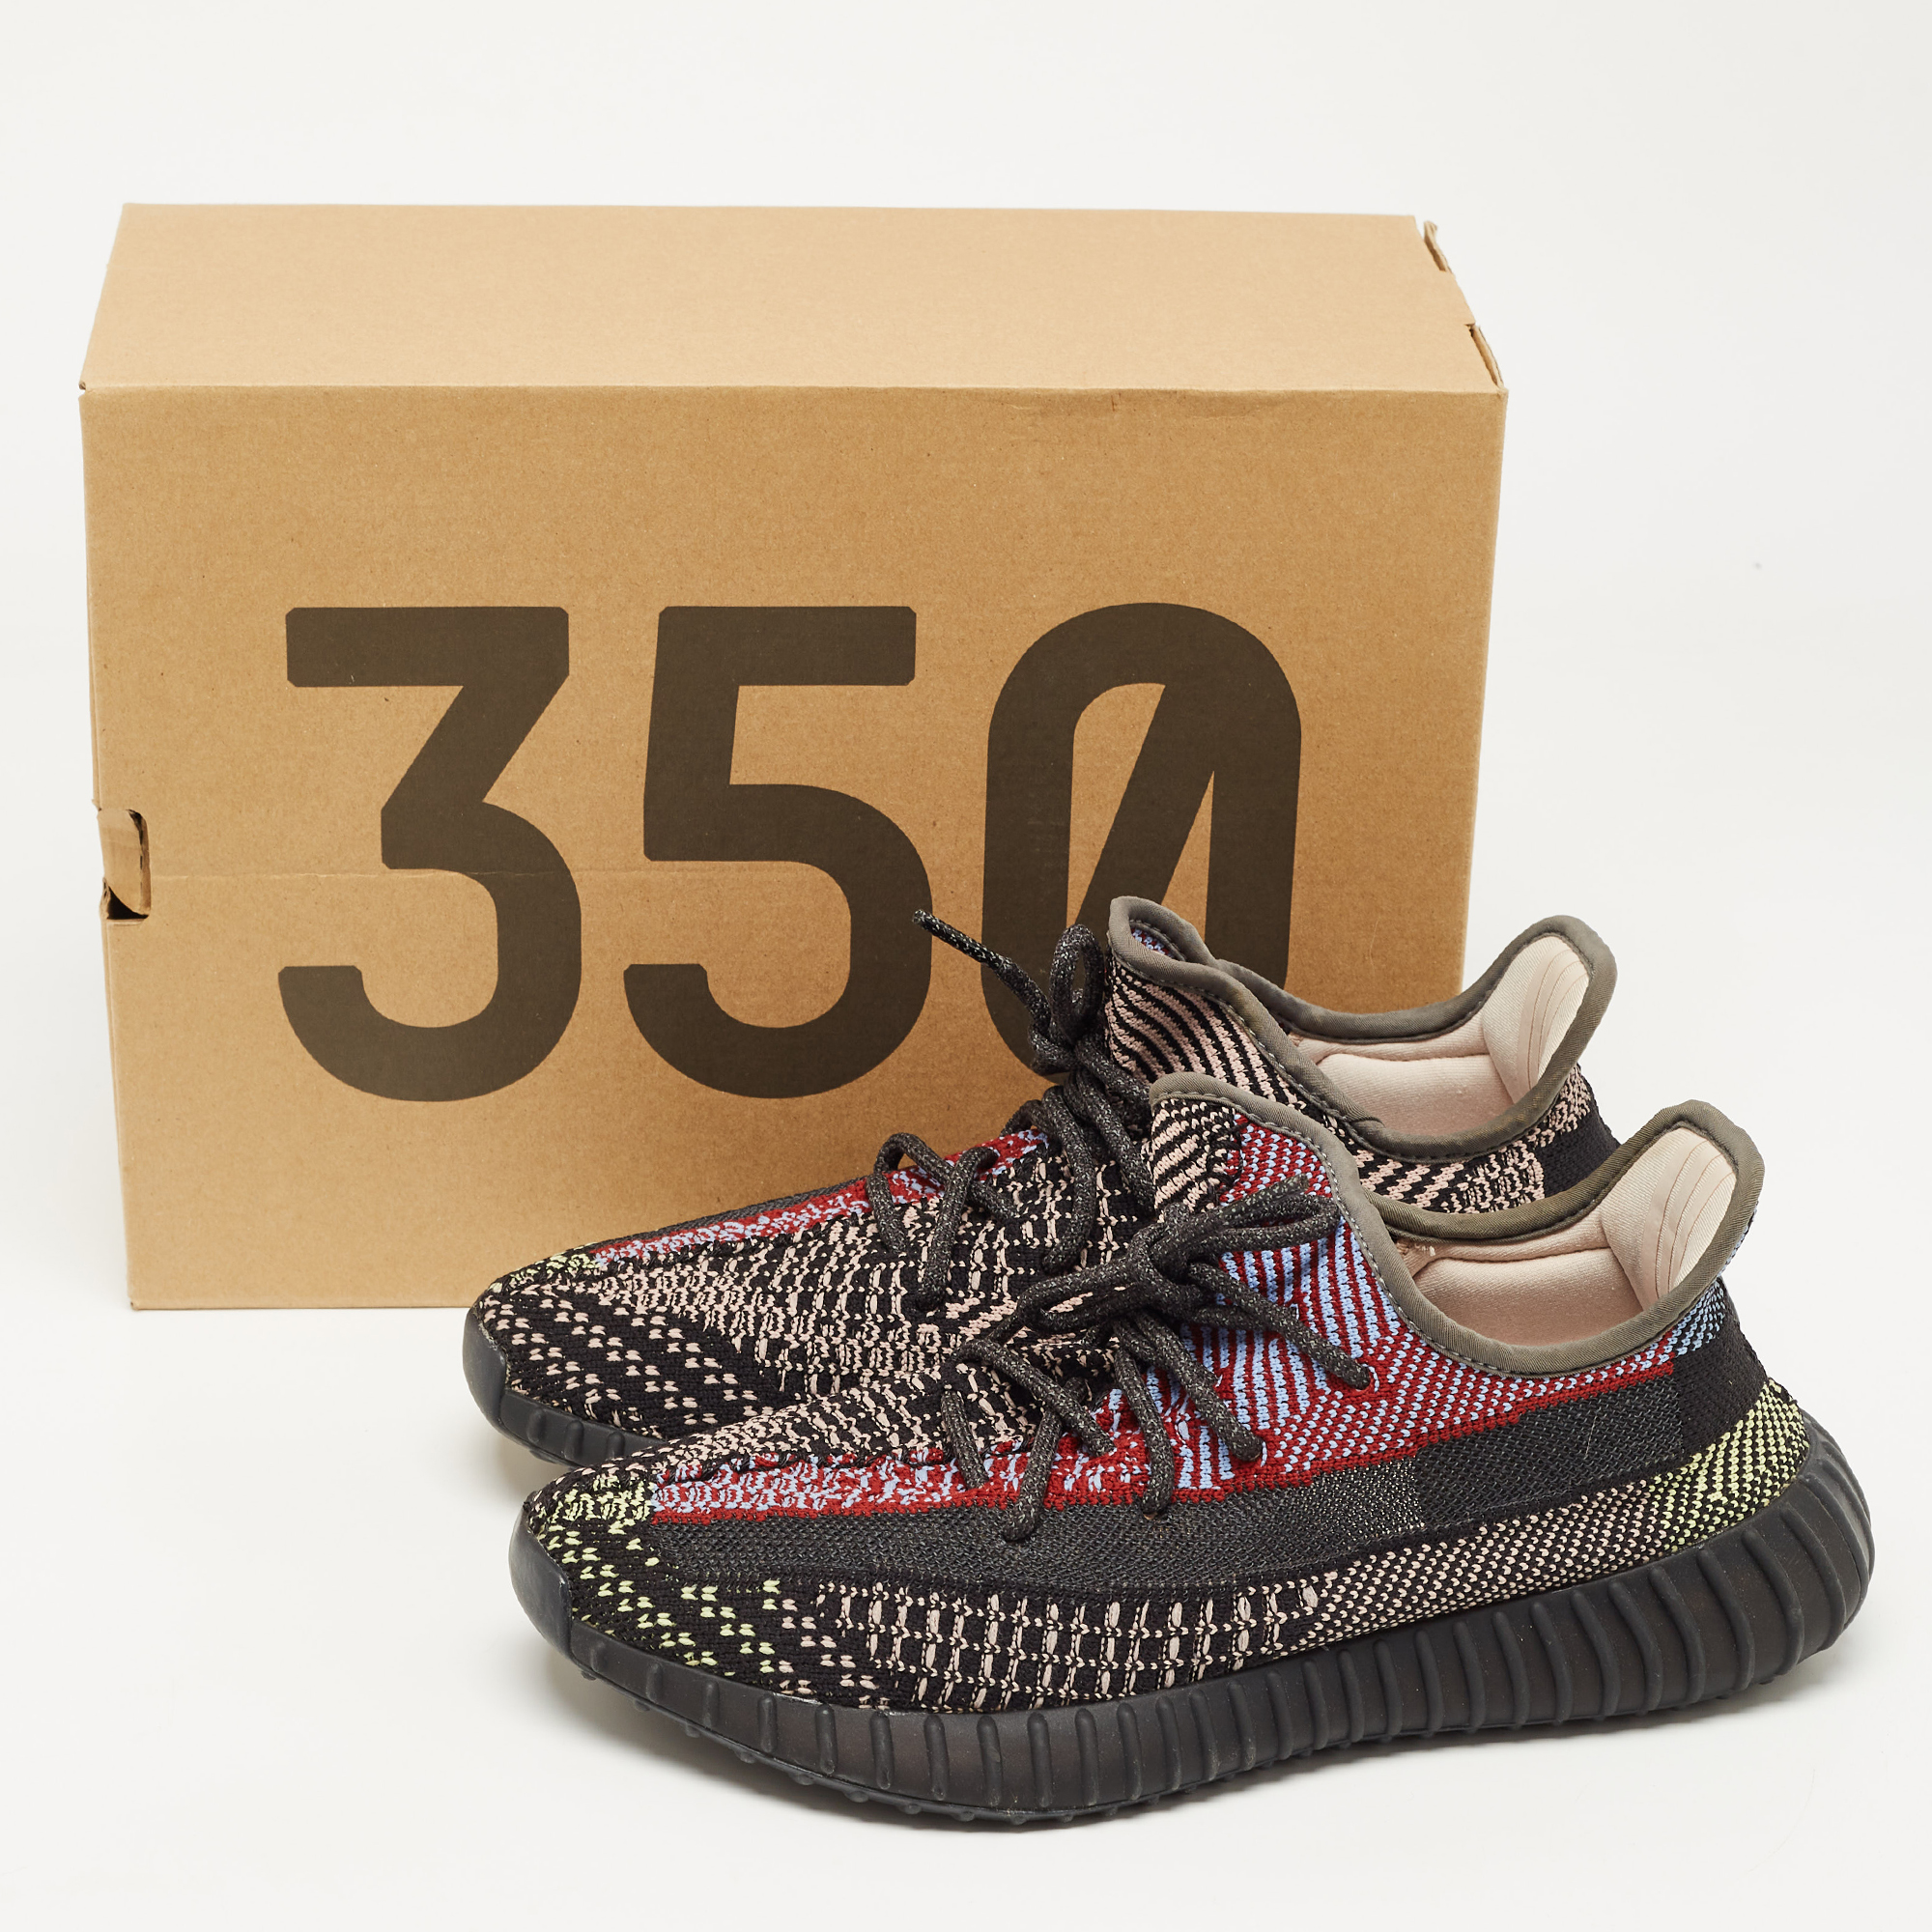 Yeezy X Adidas Multicolor Knit Fabric  Boost 350 V2 Yecheil (Non-Reflective) Sneakers Size 42